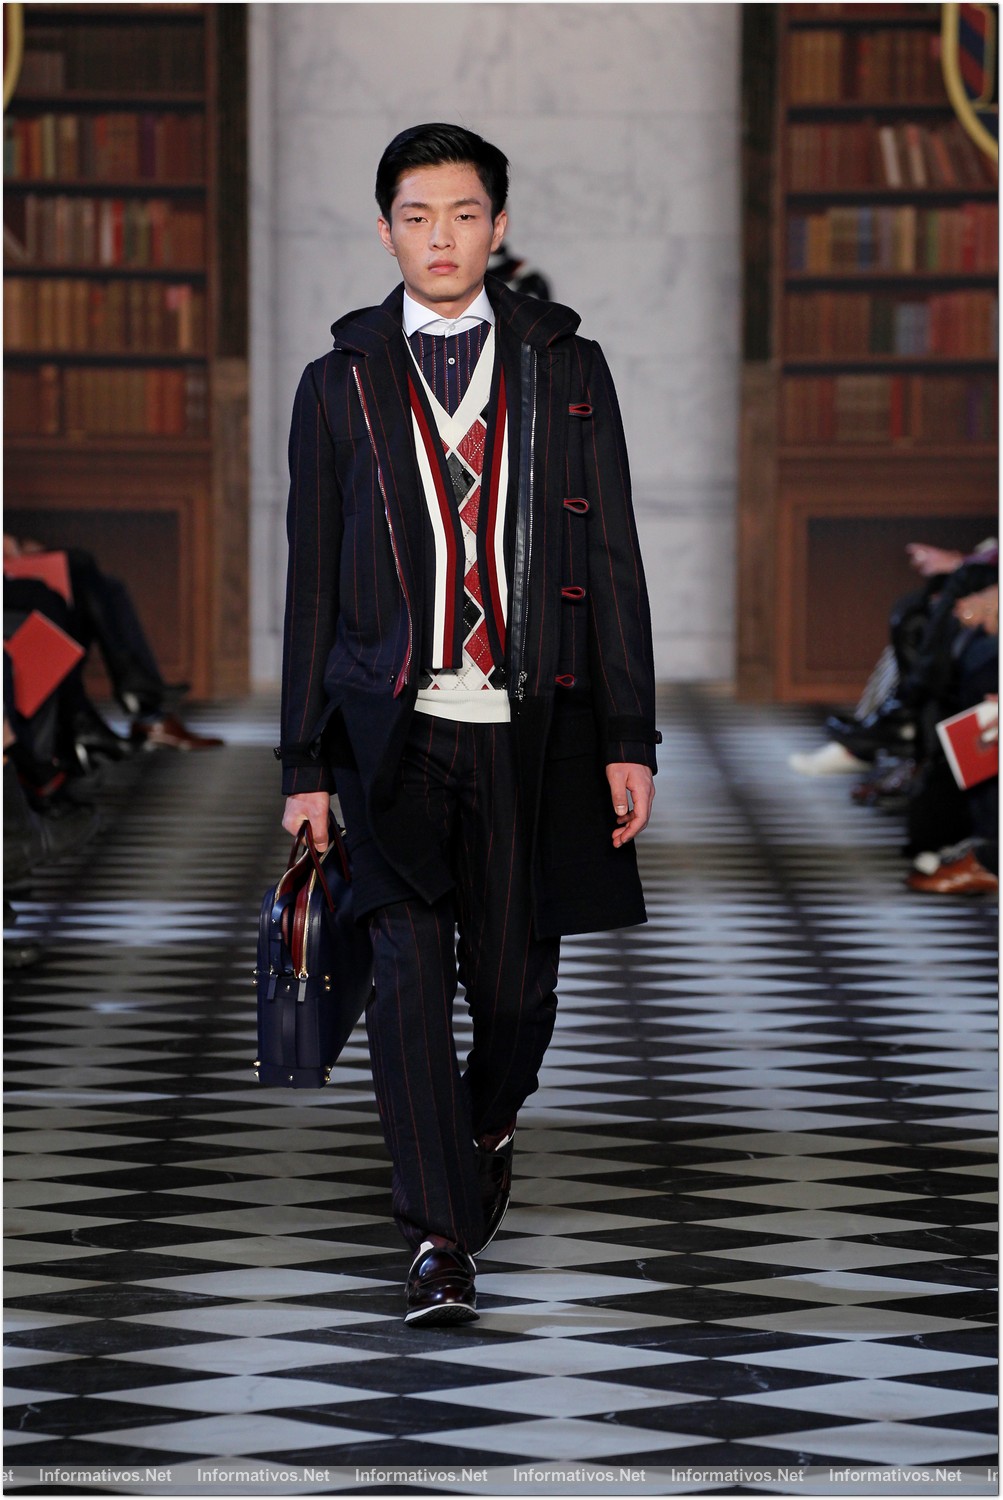 NY08FEB013.- Desfile Tommy Hilfiger Fall 2013 Men's Collection. 26. SATOSHI